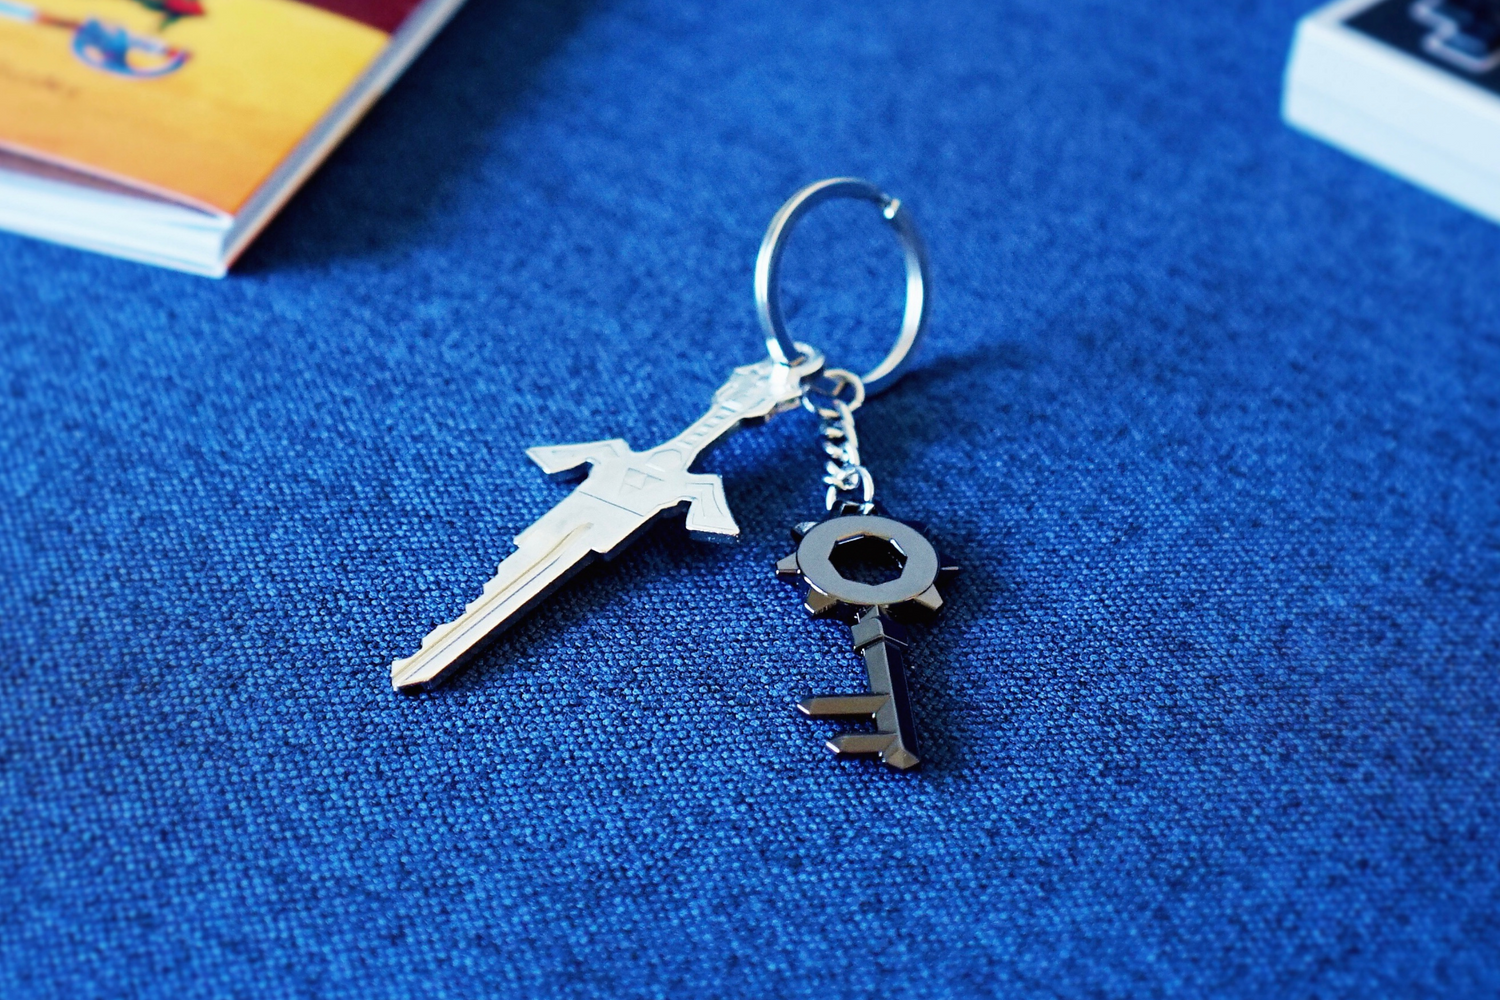 A silver key and black keychain on a blue background